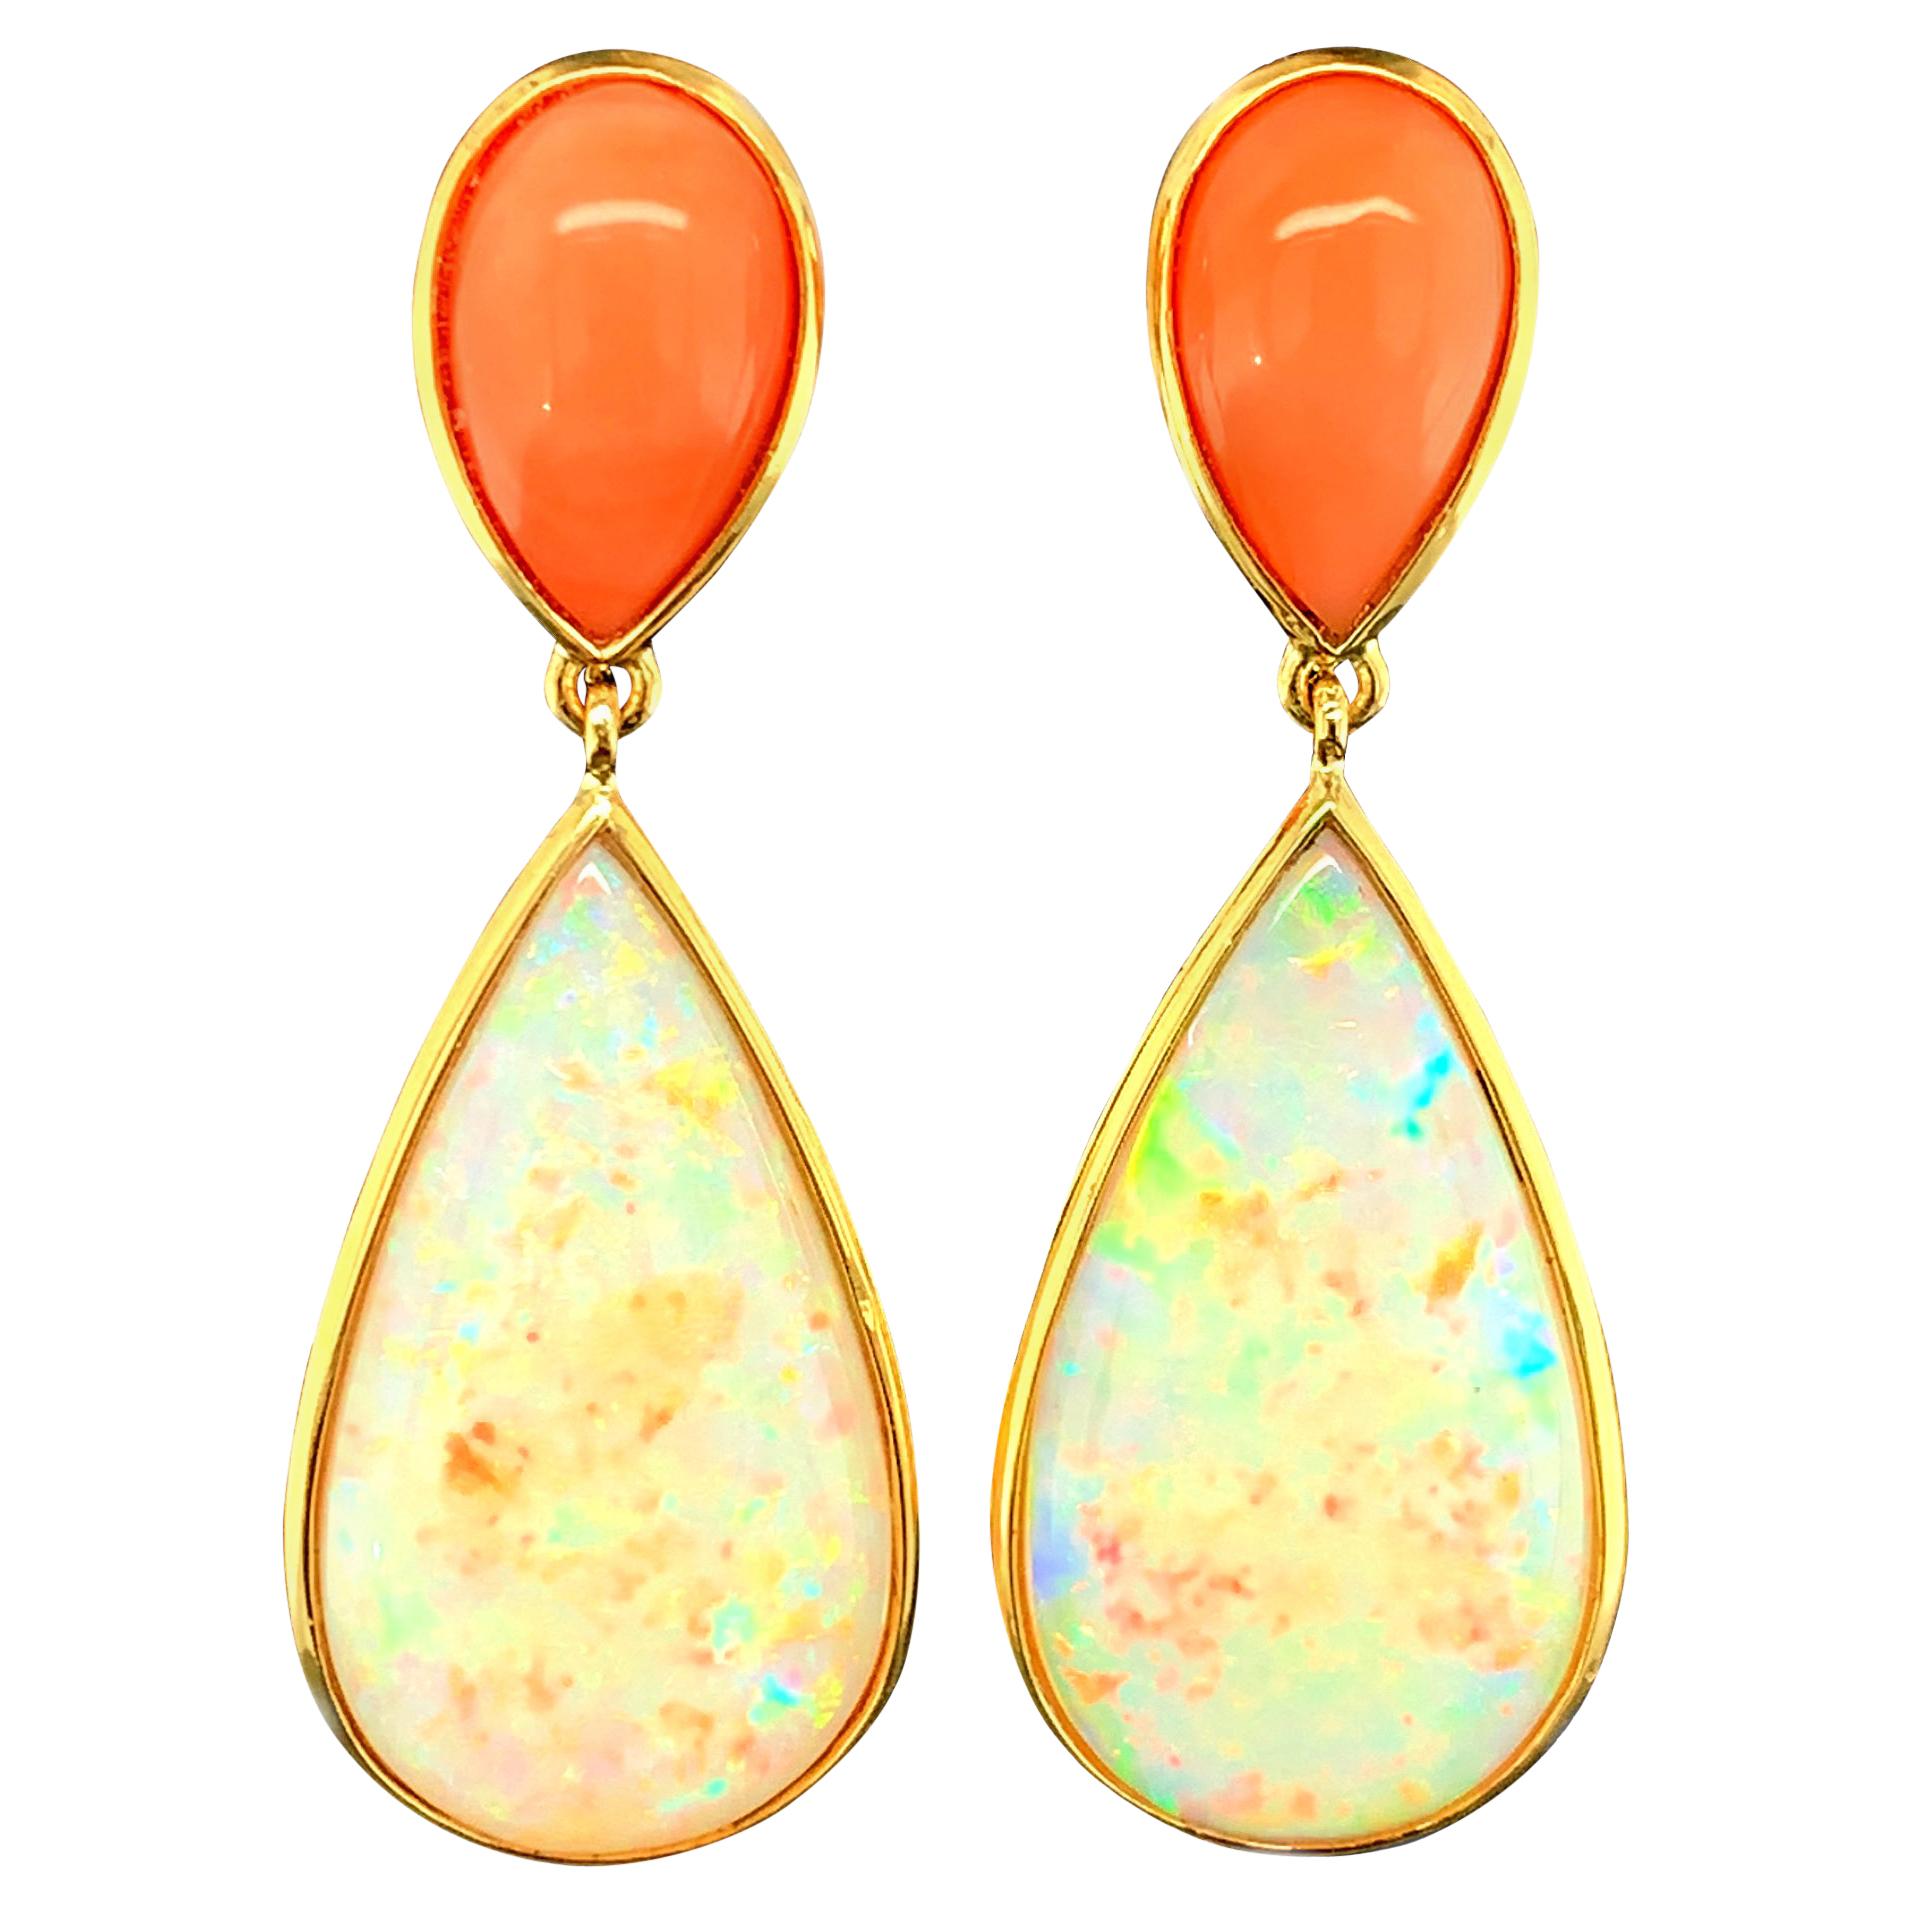 These eye-catching drop earrings feature a lovely combination of large colorful opals paired with peach-colored coral! The opals have been cut as pear-shaped cabochons whose elegant shape is highlighted by setting them in sleek 18k yellow gold